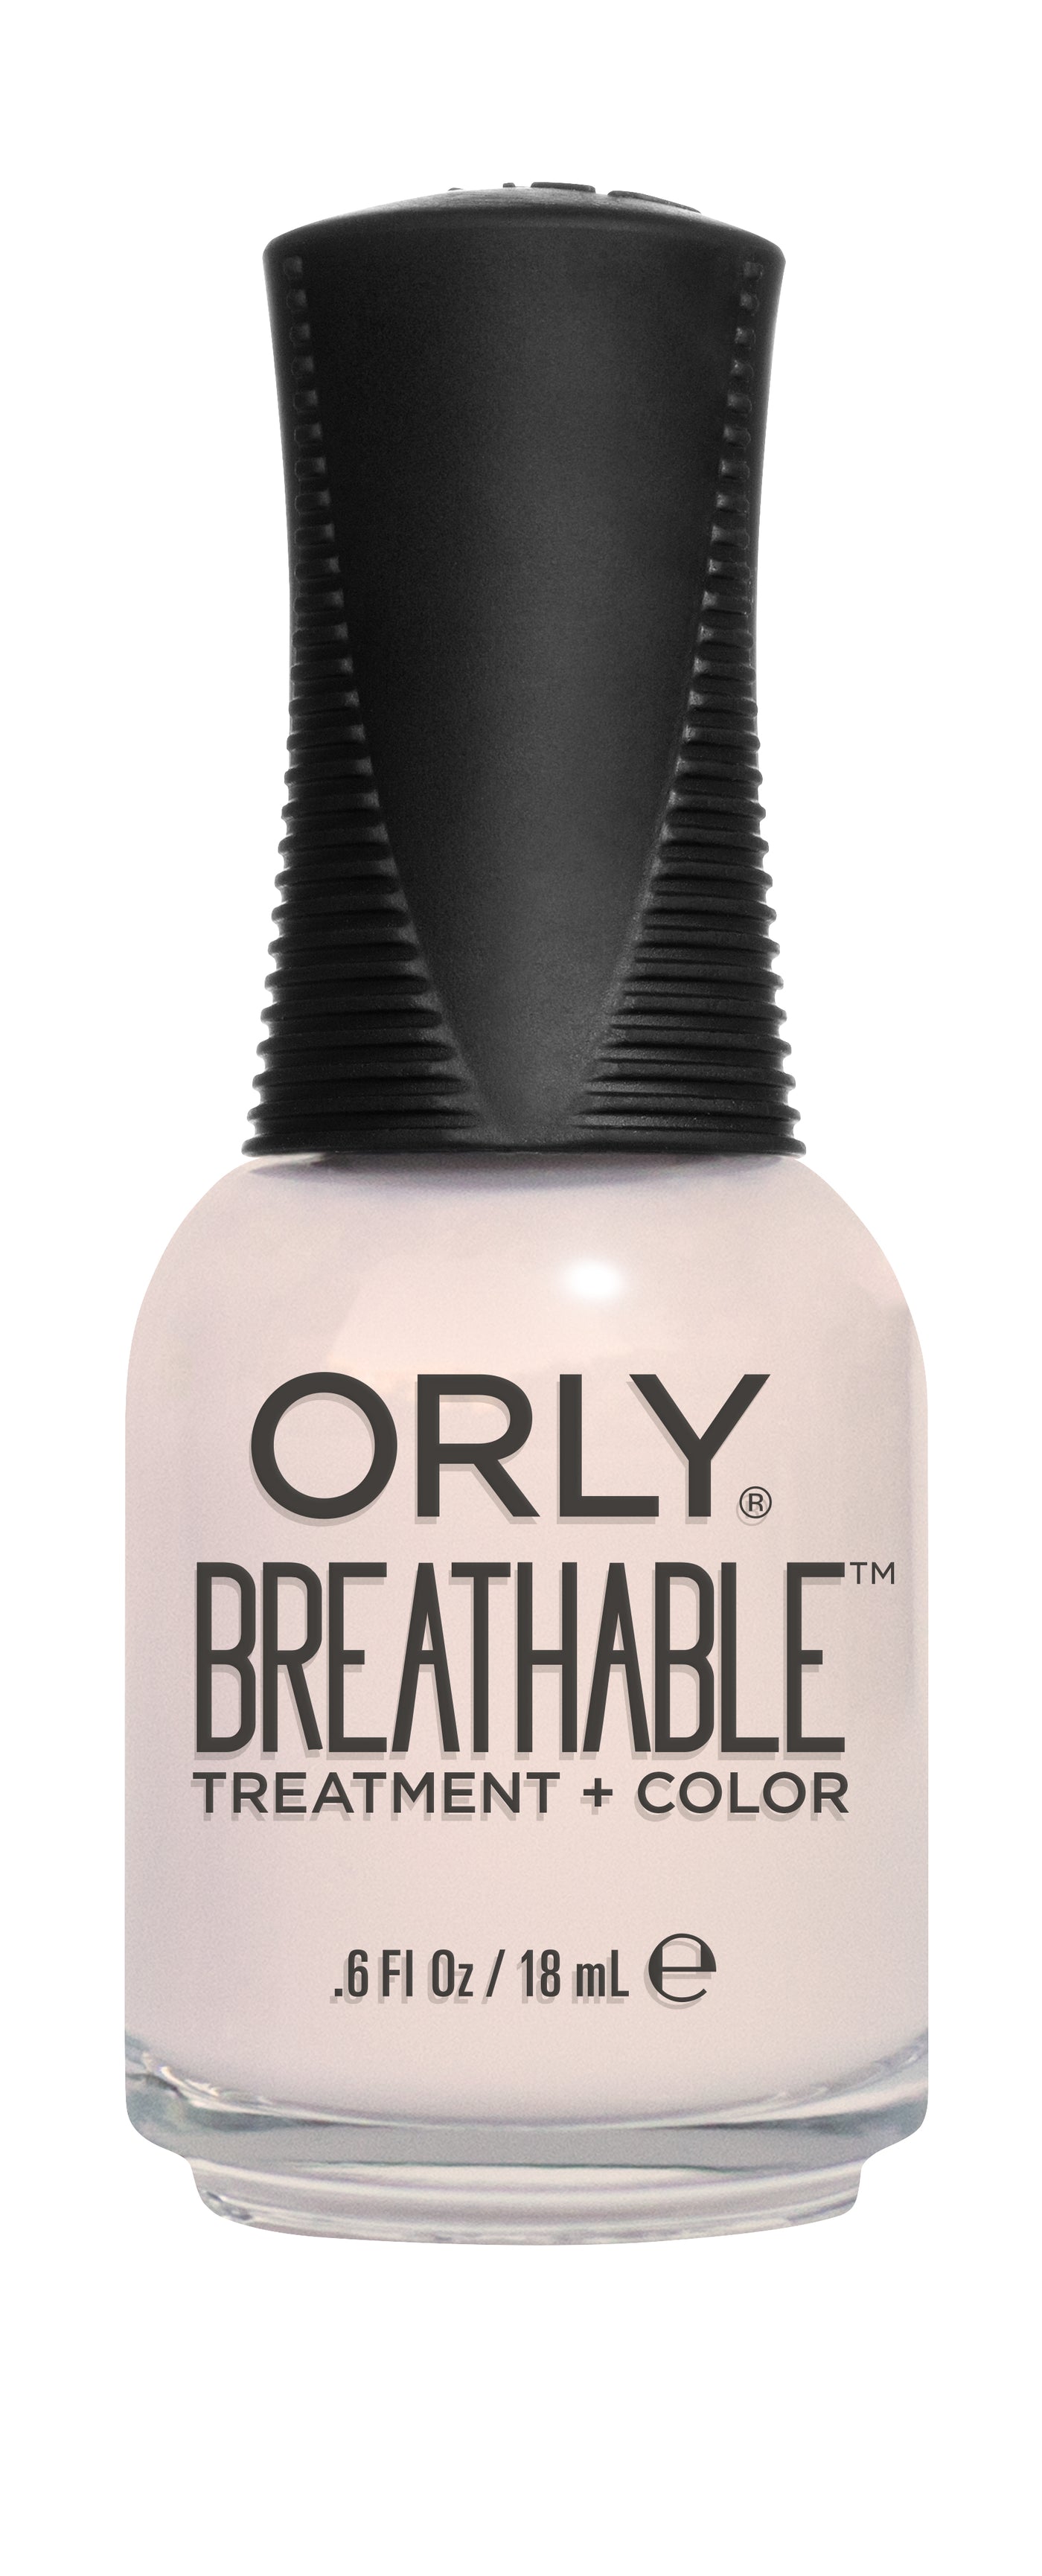 ORLY Breathable Nail Polish - Barely There 20908